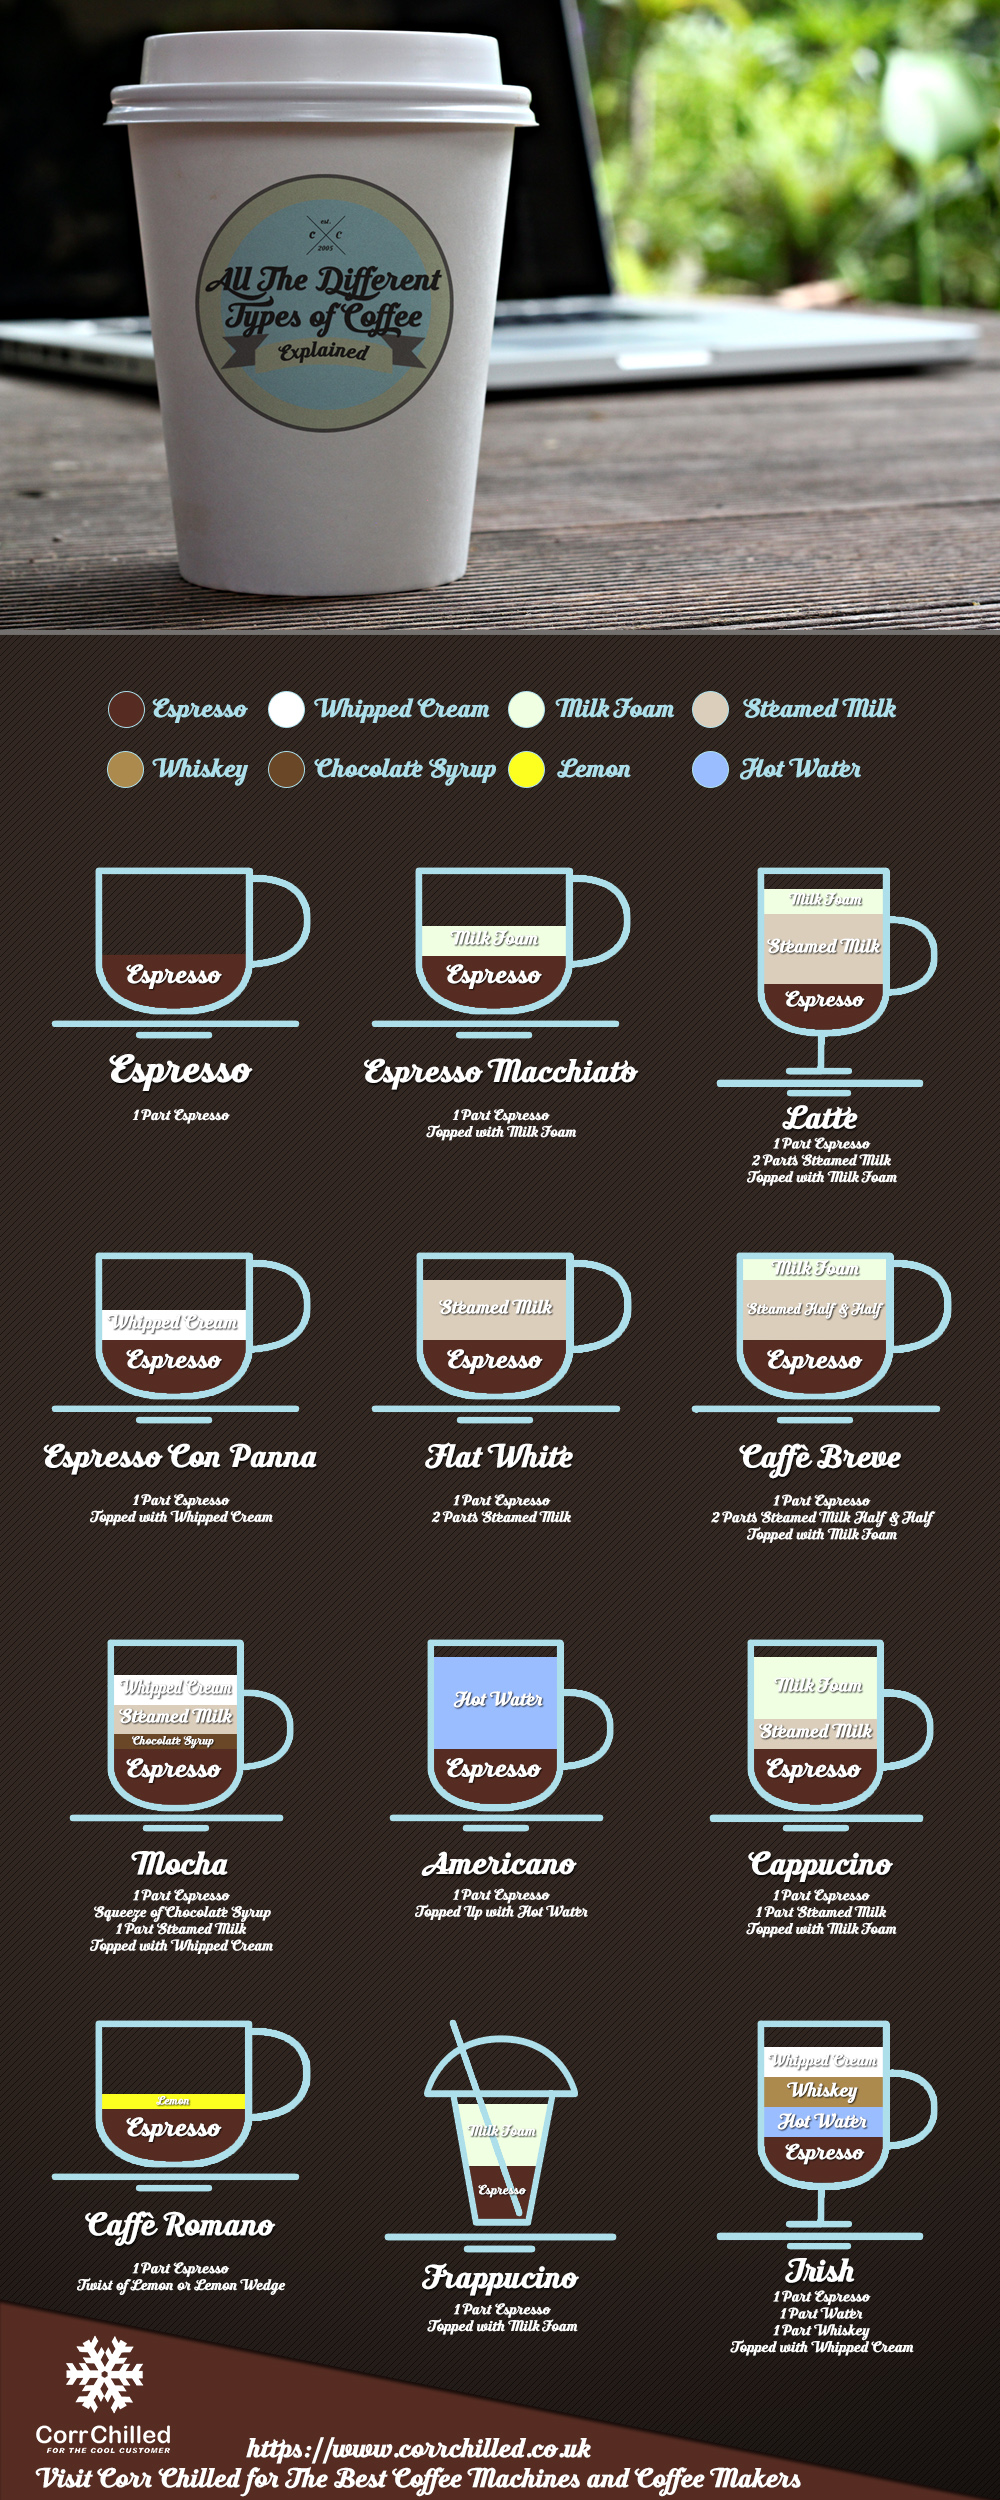 Different Types of Coffee Explained